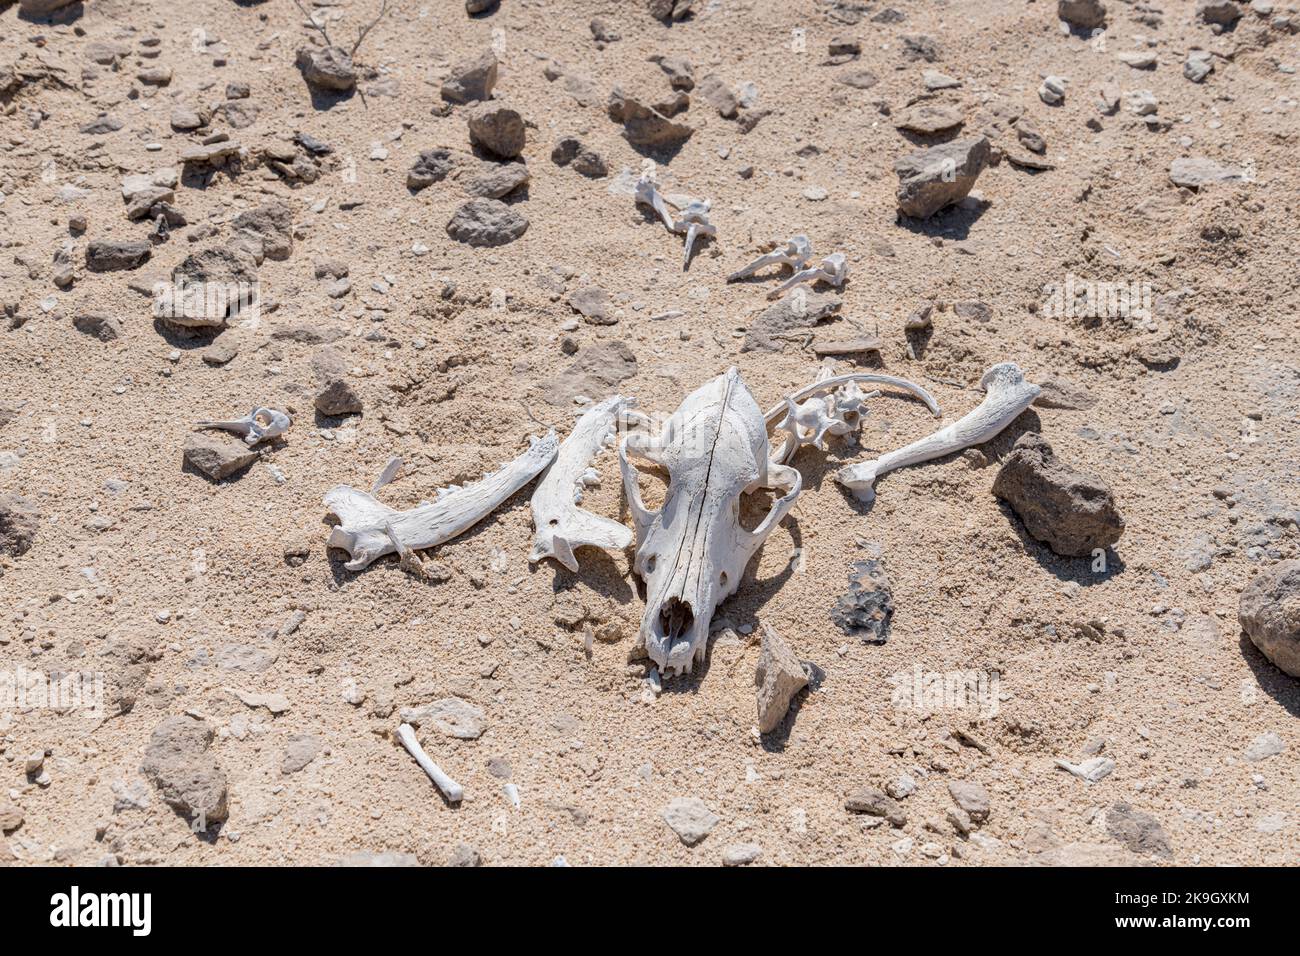 Skull and other bones in the desert of a dead animal Stock Photo